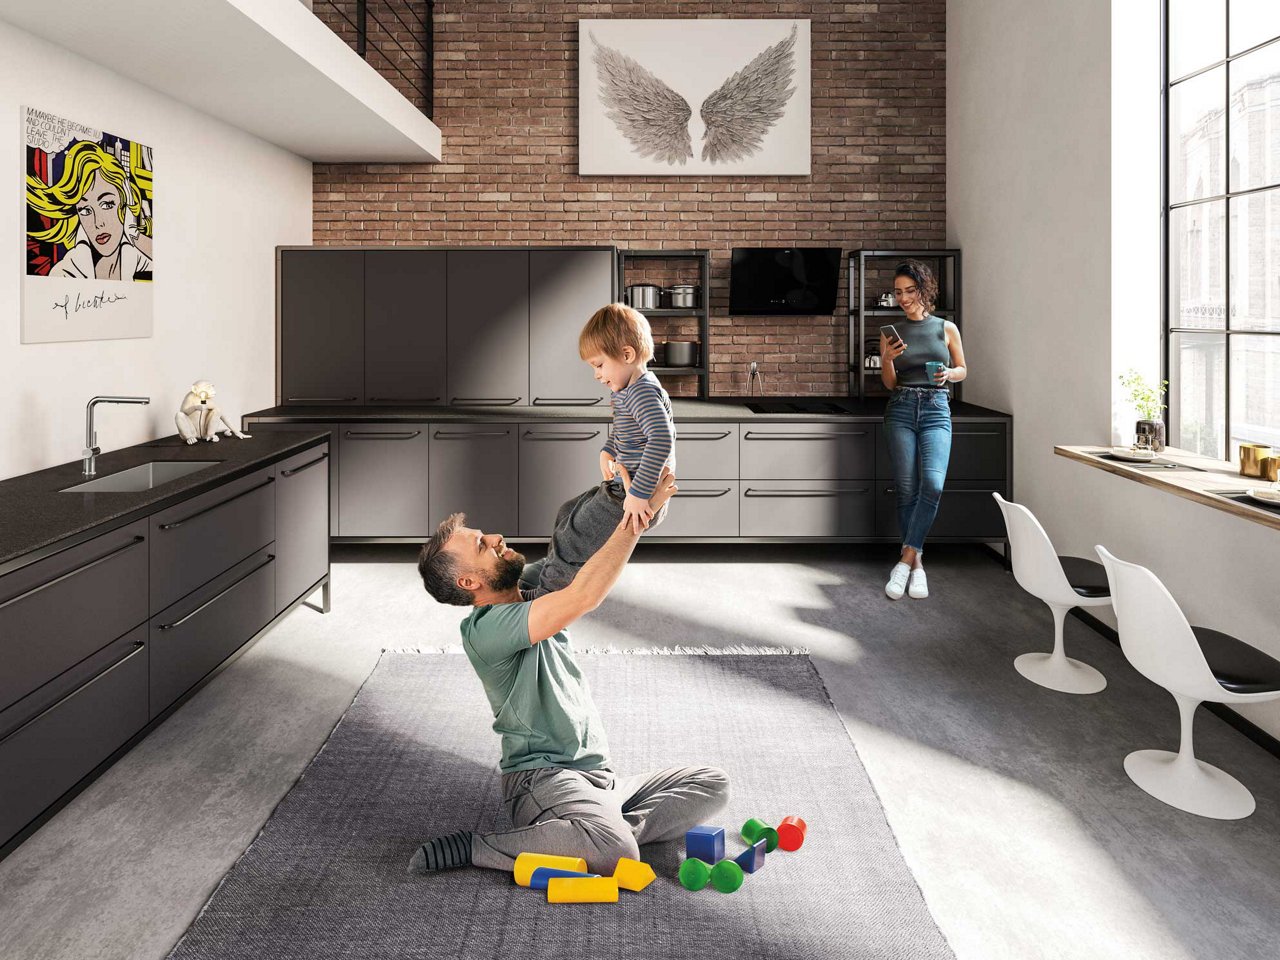 Modern loft kitchen with a man playing with a young boy on the floor